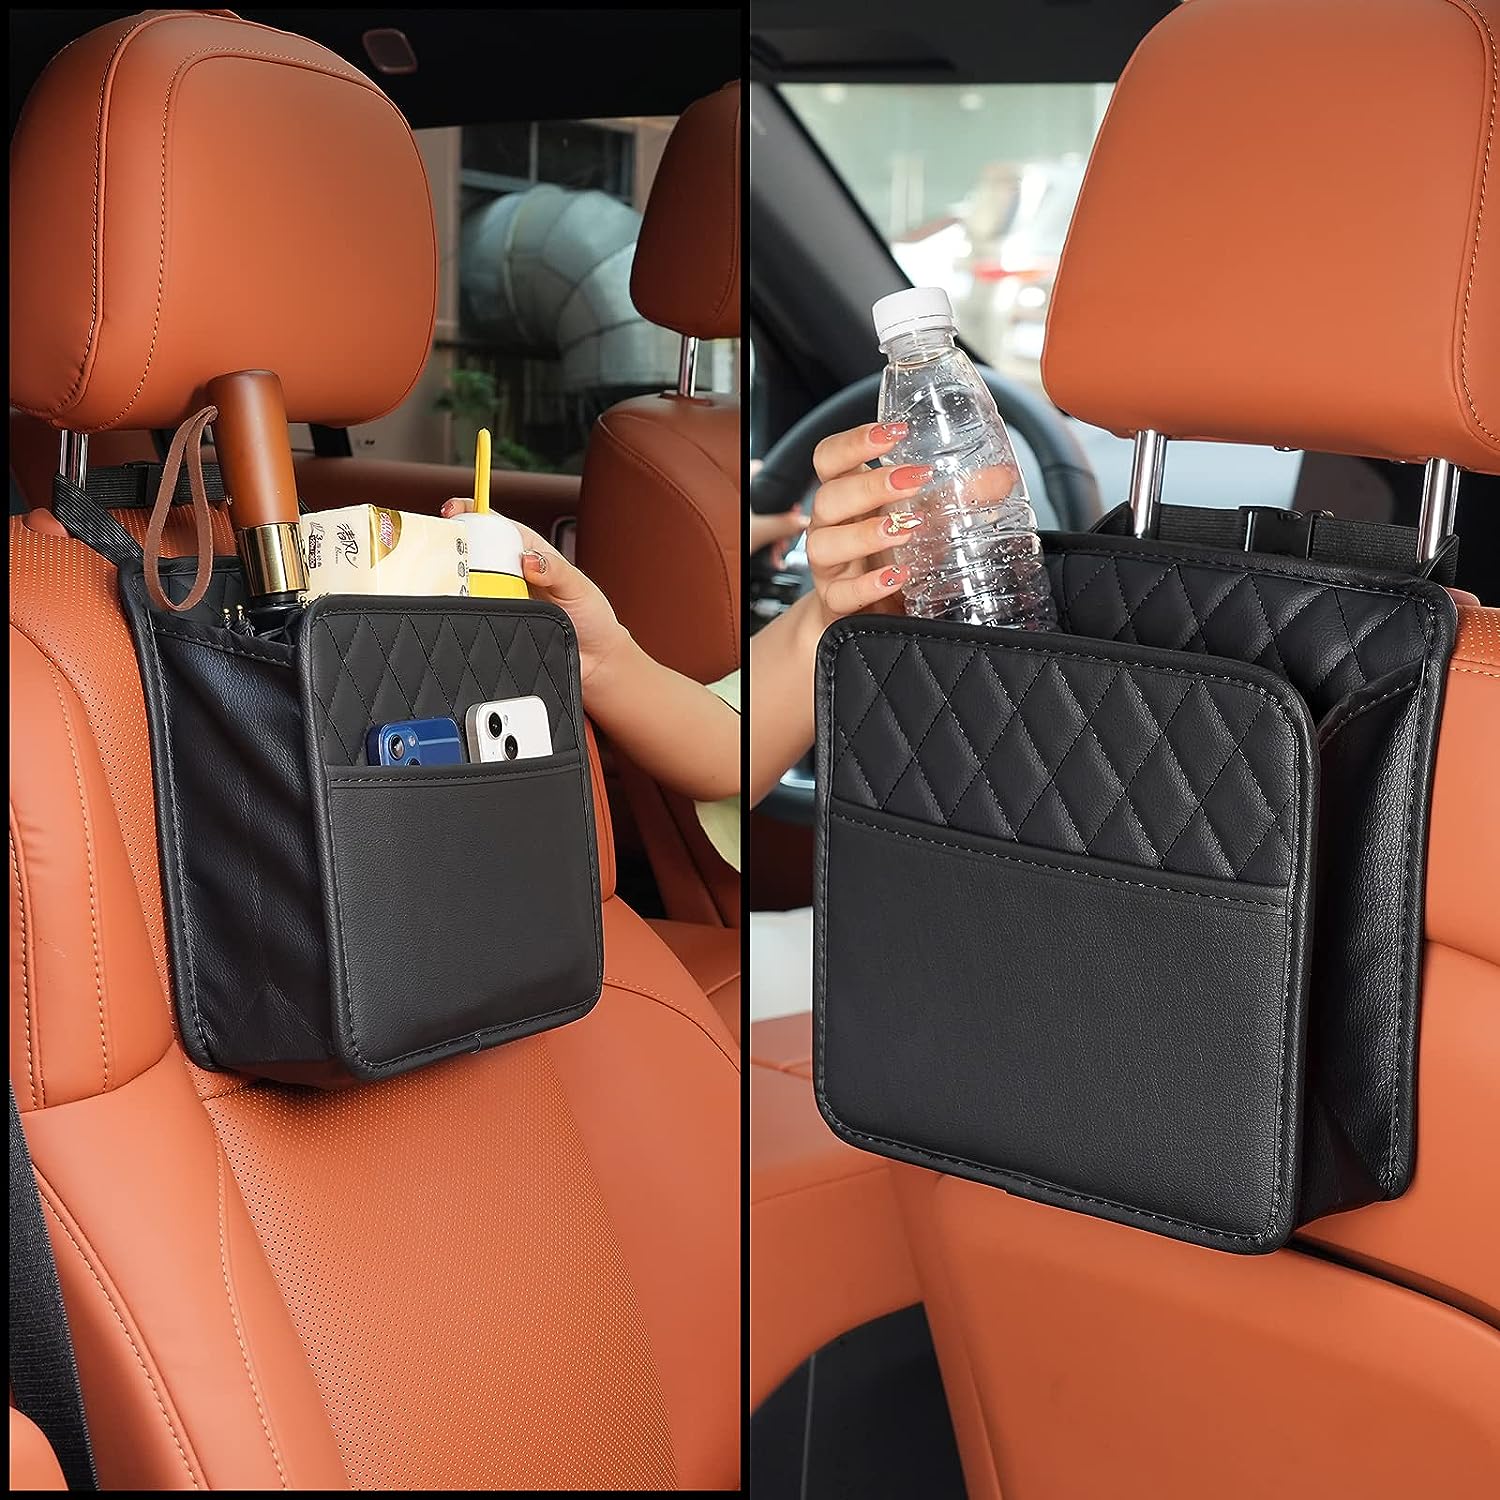  Car Organizer Between Seats, Car Organization Accessories  Storage Bag Holder for Car Front and Back Seat, Car Console Seat Organizer  Storage Pocket : Automotive